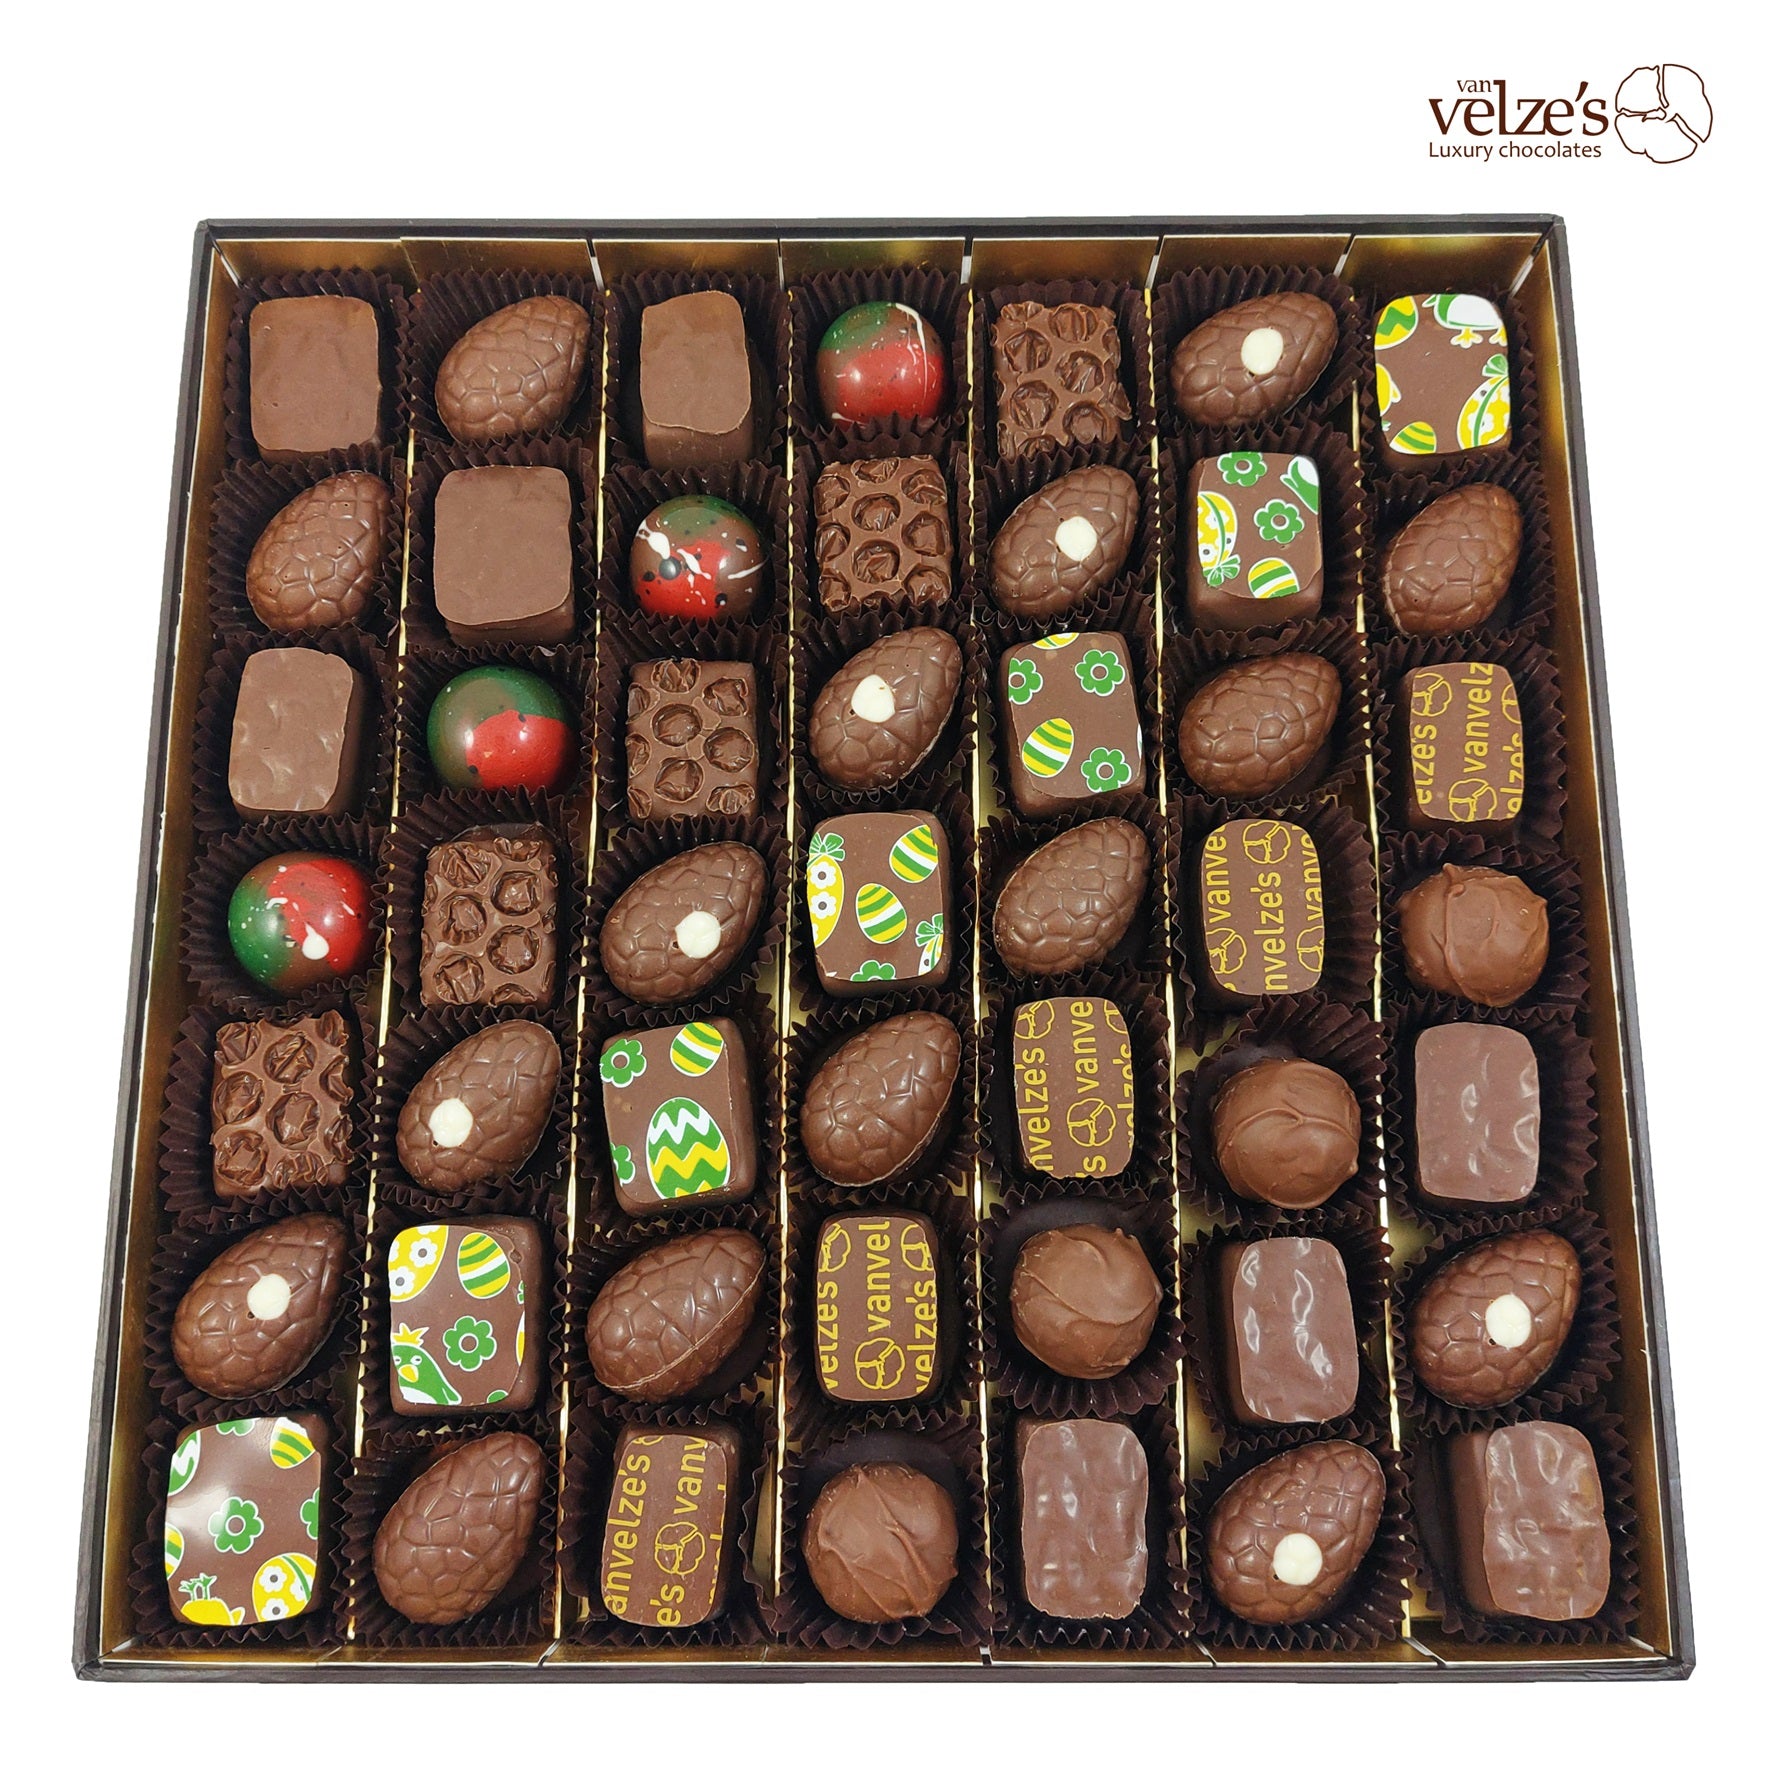 Easter chocolates gifts from Ireland. Mayo Chocolates, Artisan chocolate, County Mayo, Luxury chocolates